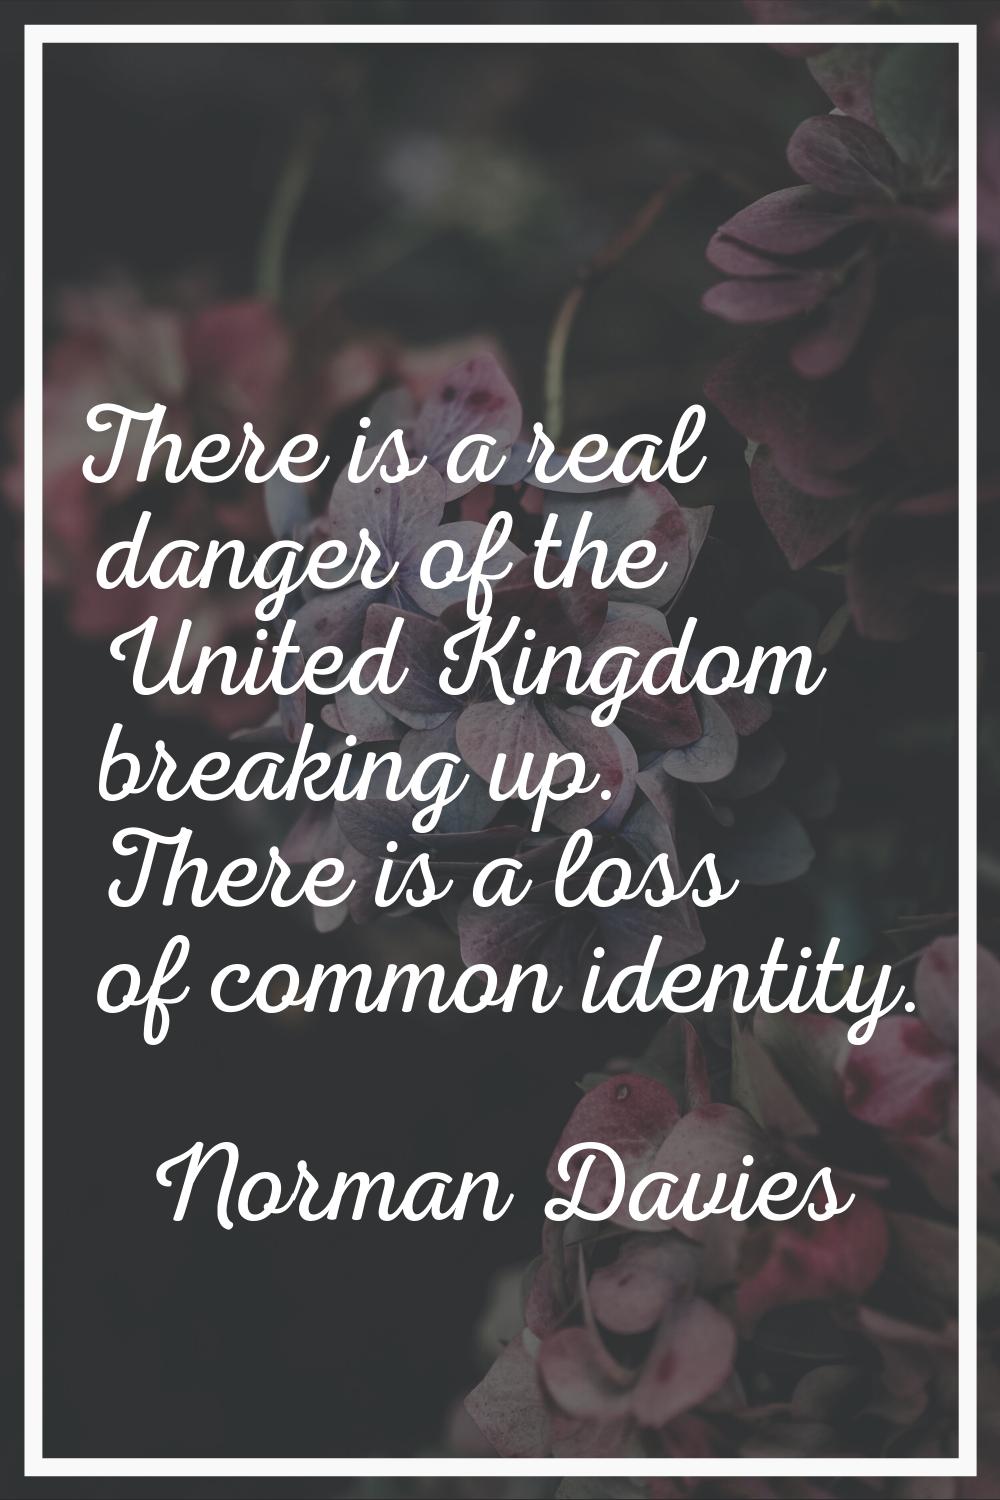 There is a real danger of the United Kingdom breaking up. There is a loss of common identity.